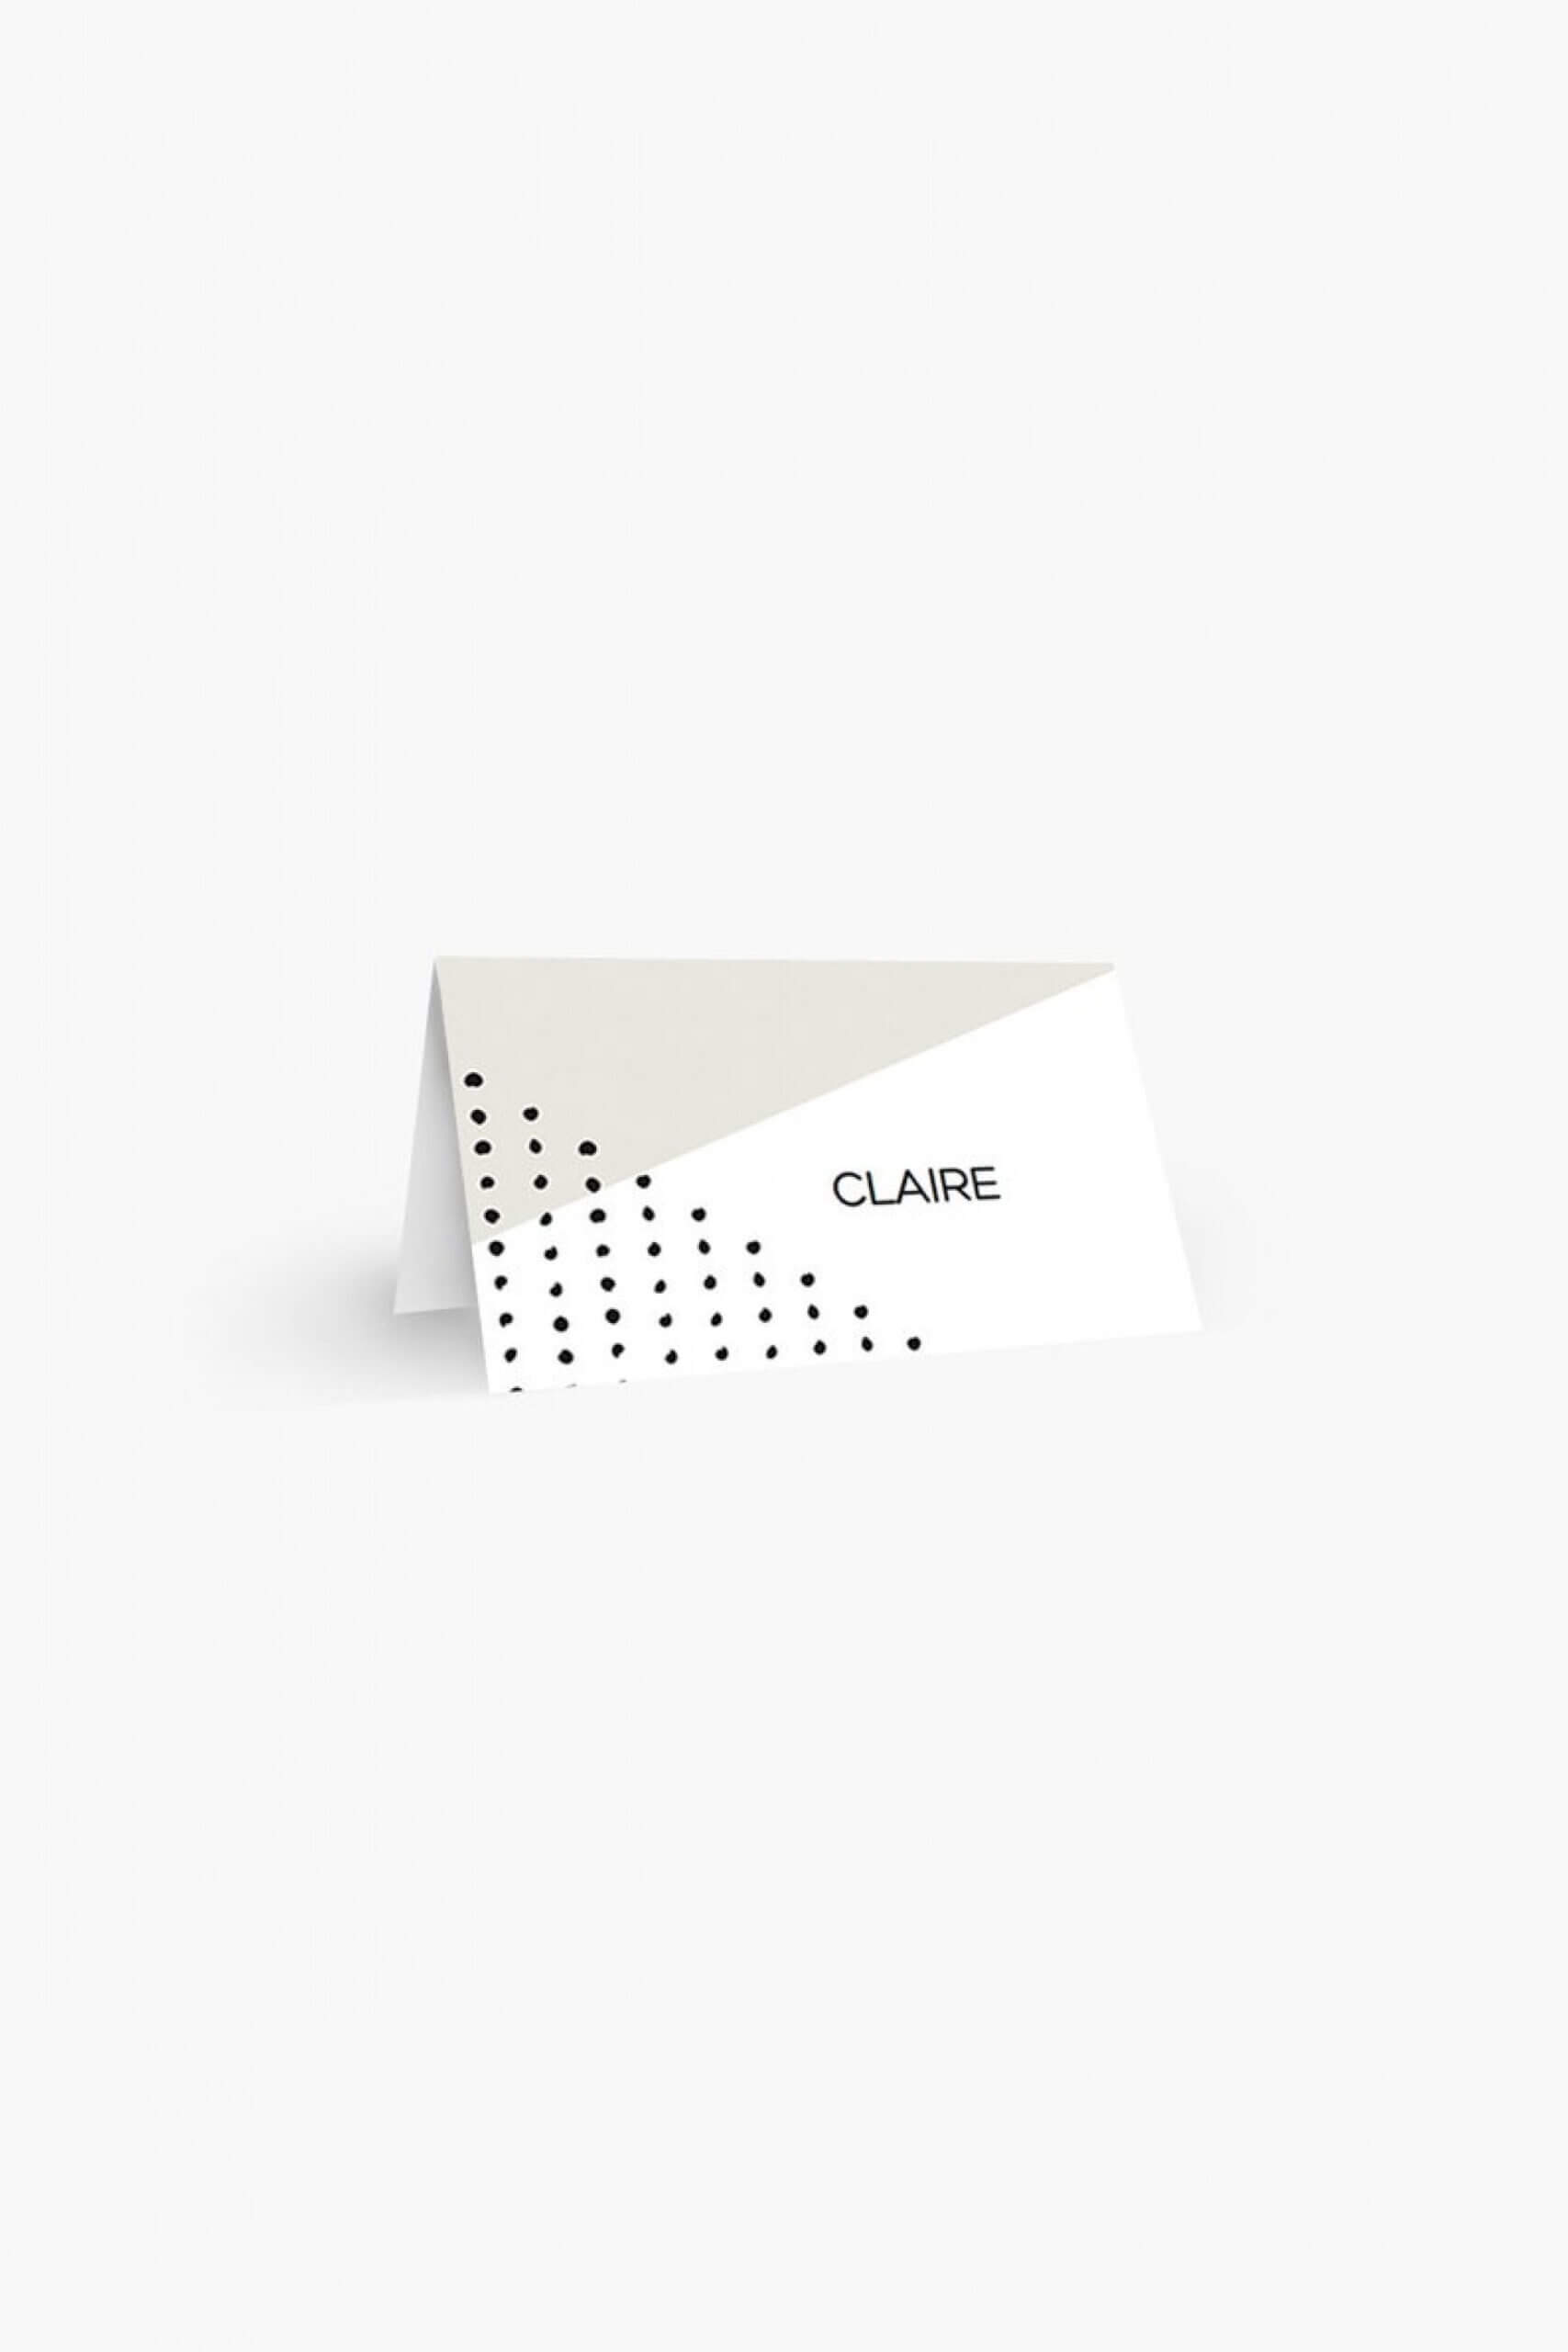 007 Template Ideas Printable Place Cards Breathtaking Regarding Paper Source Templates Place Cards